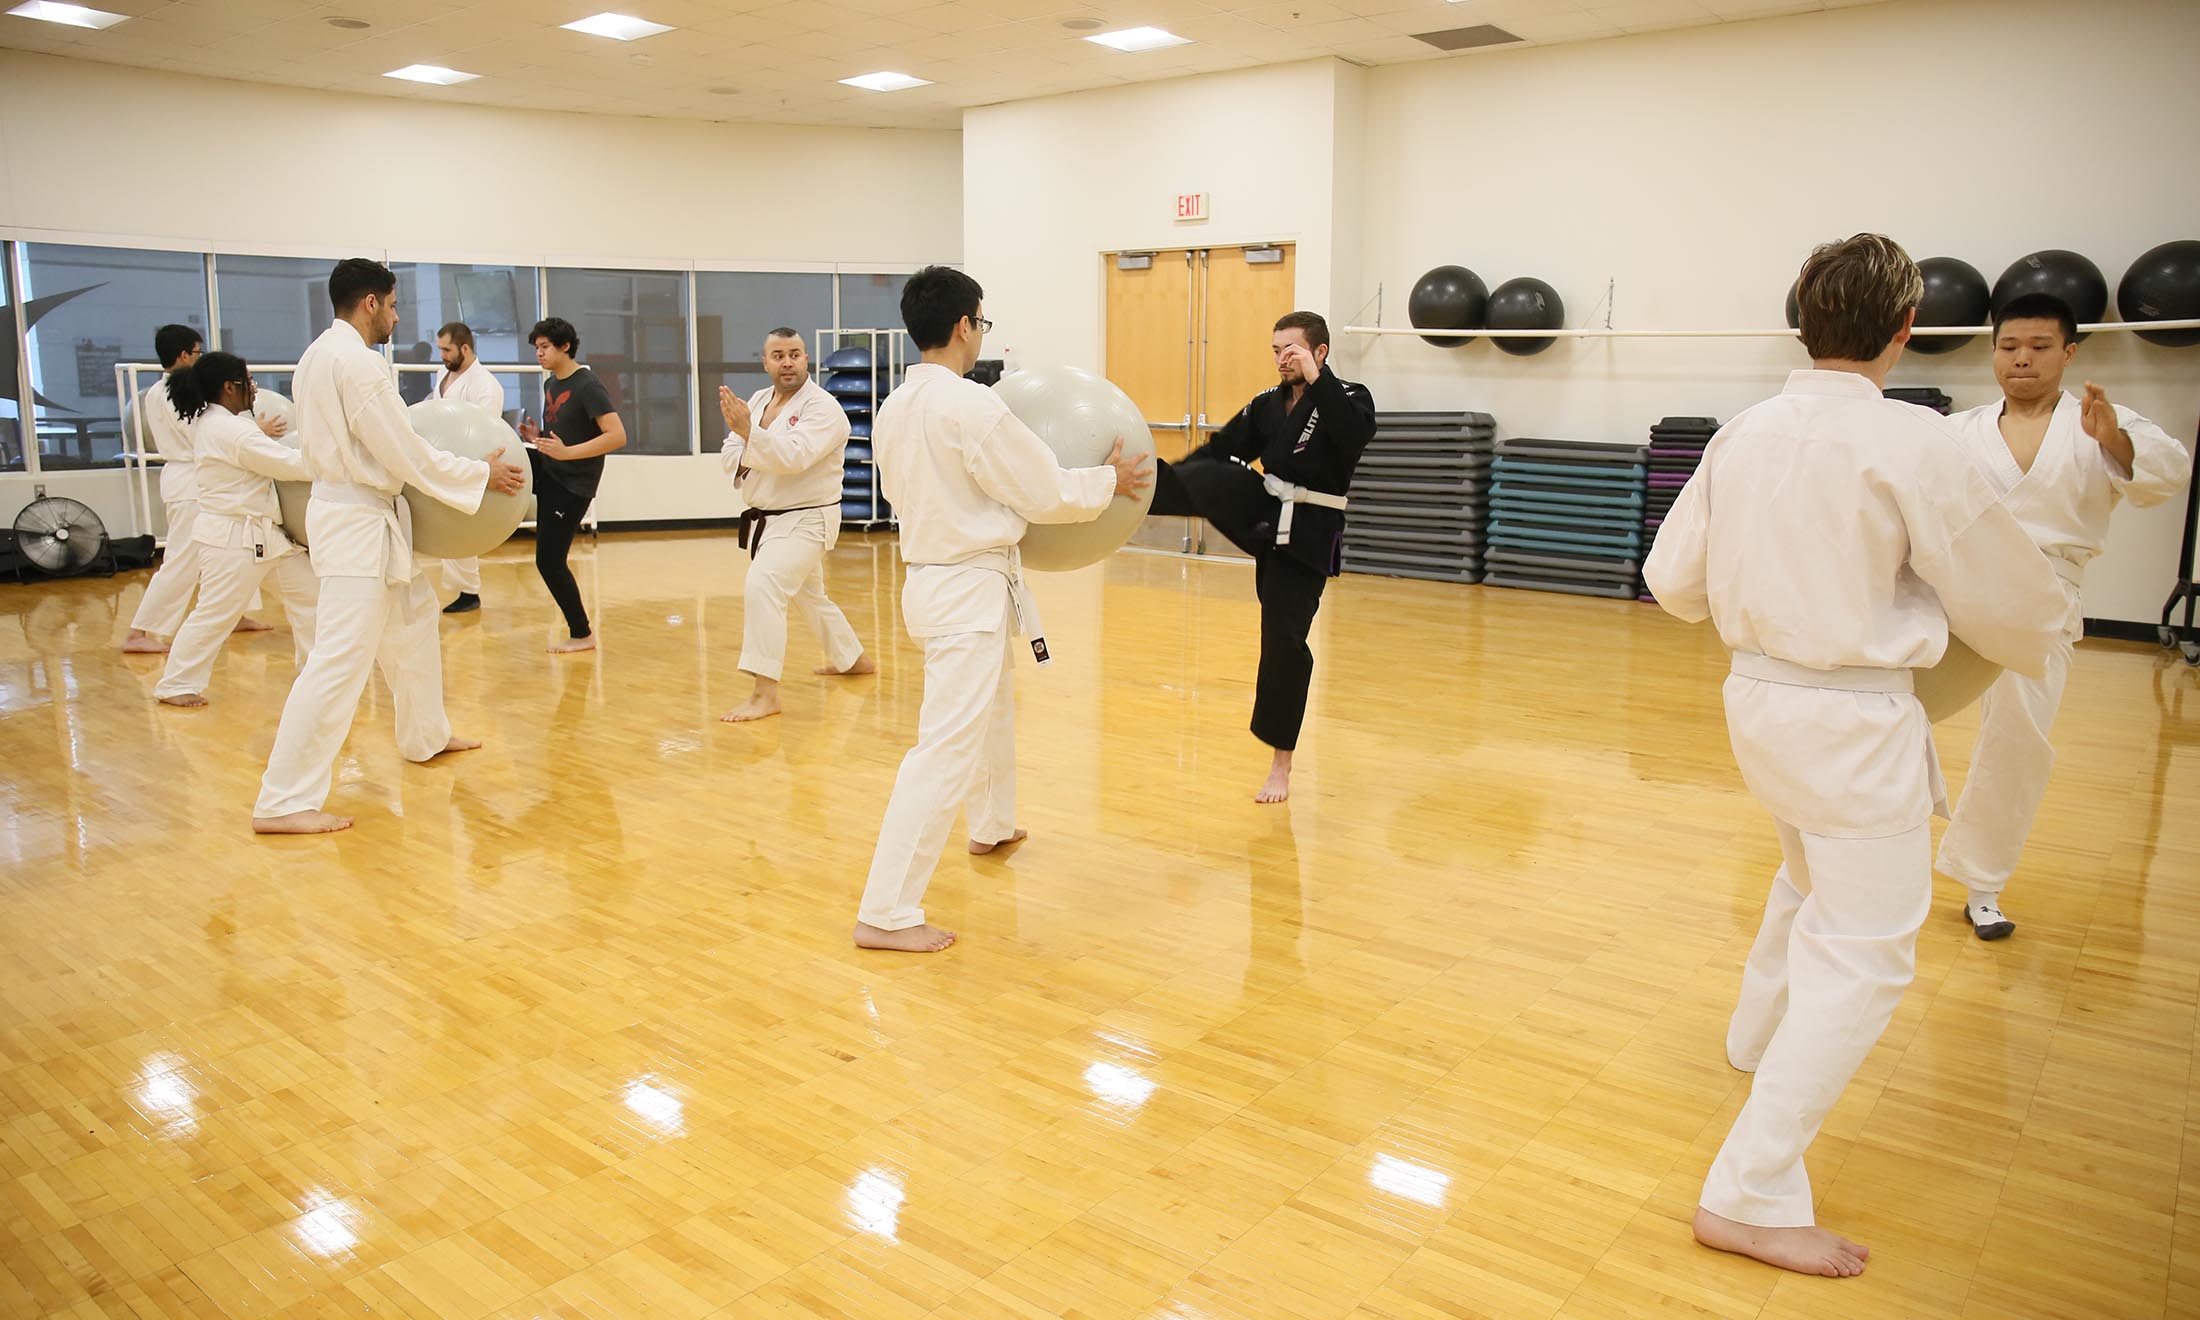 Parafencing, Karate and Badminton club sports added at OU - 2019